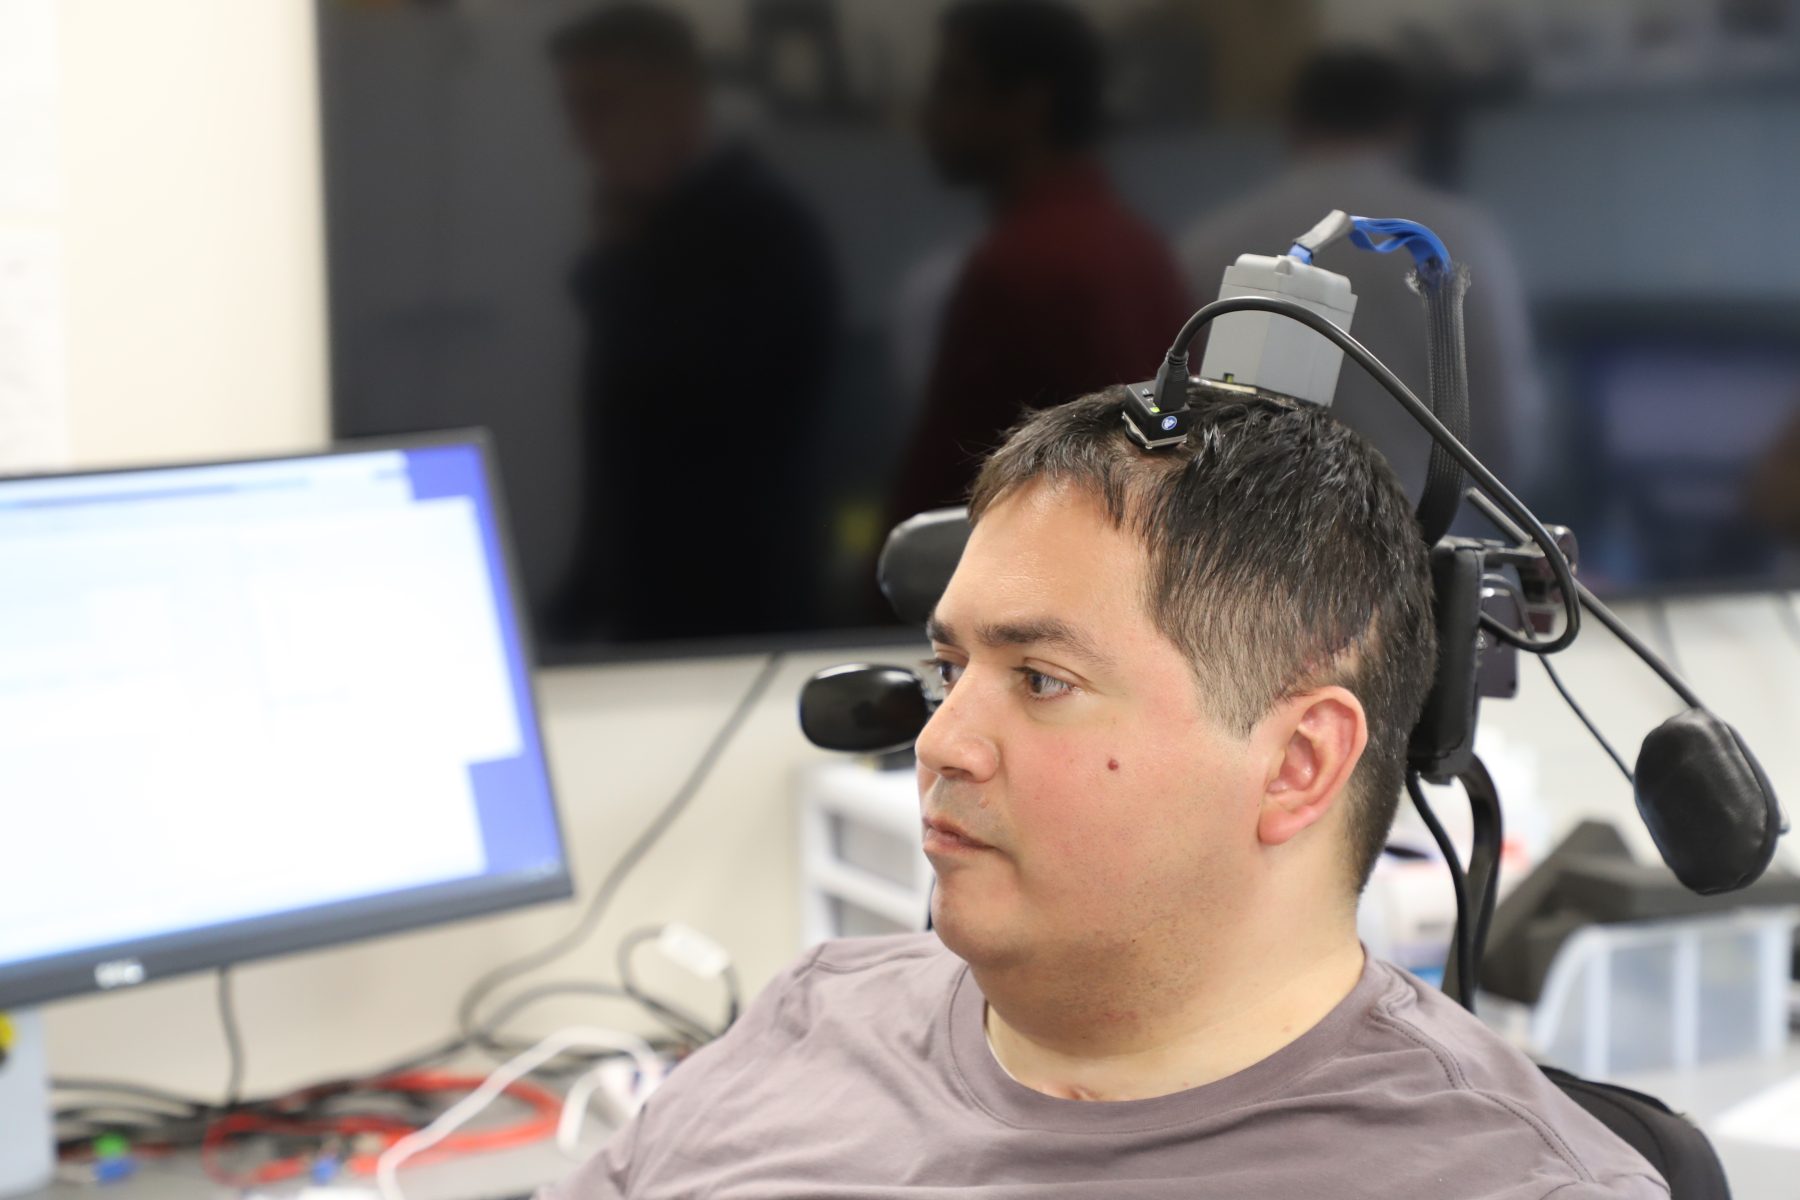 Keith Thomas, paralyzed from the chest down, can now move and feel again, with the help of AI.